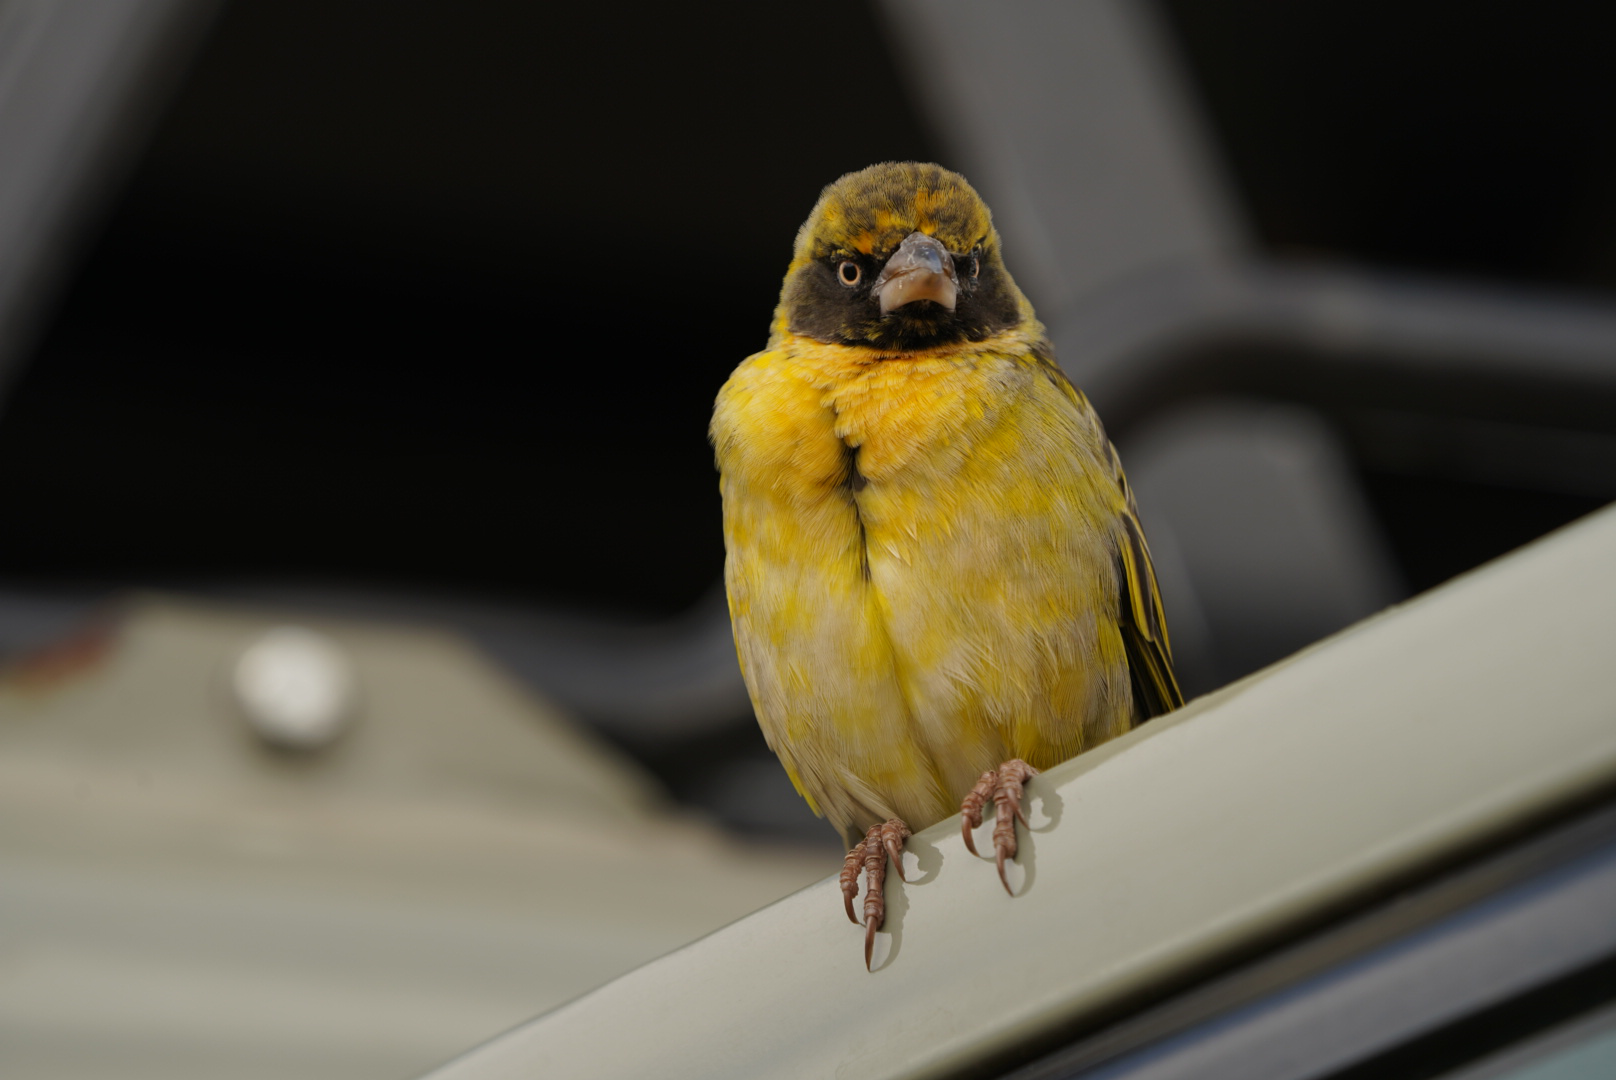 A fluffy yellow bird with a black face and very angry eyes perches on the edge of a van.